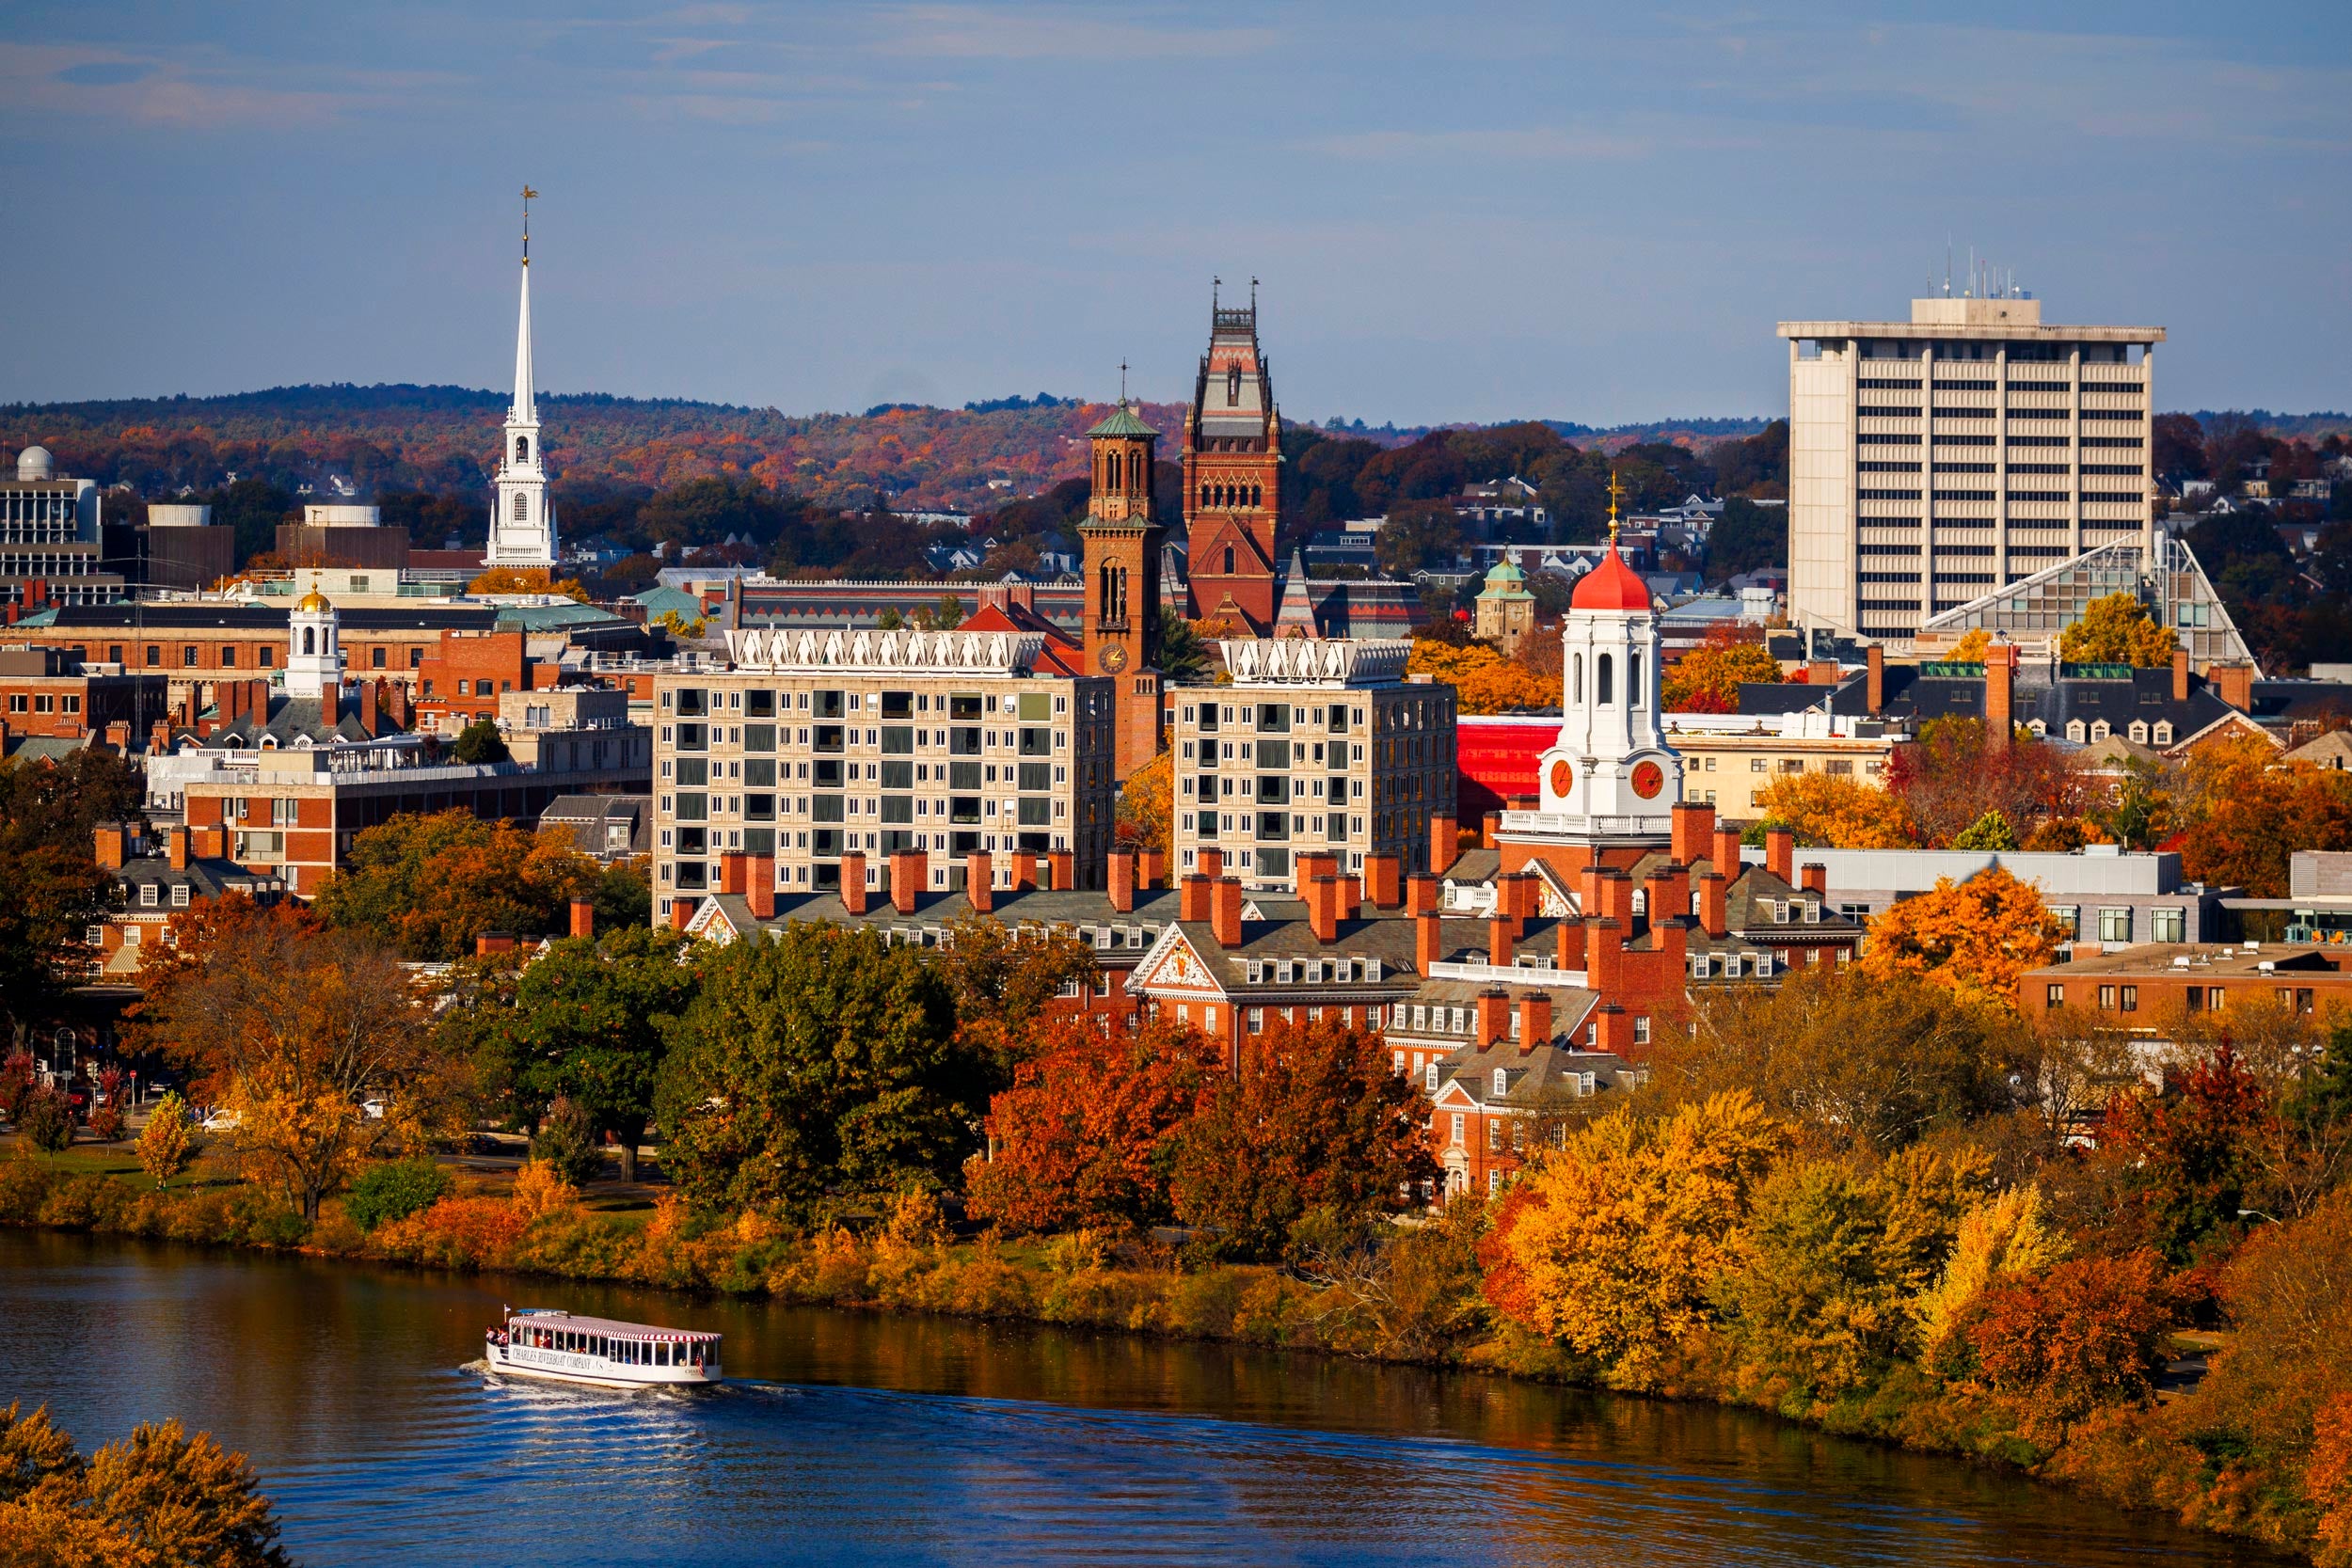 Overview of the Charles River and Harvard campus with fall foliage.